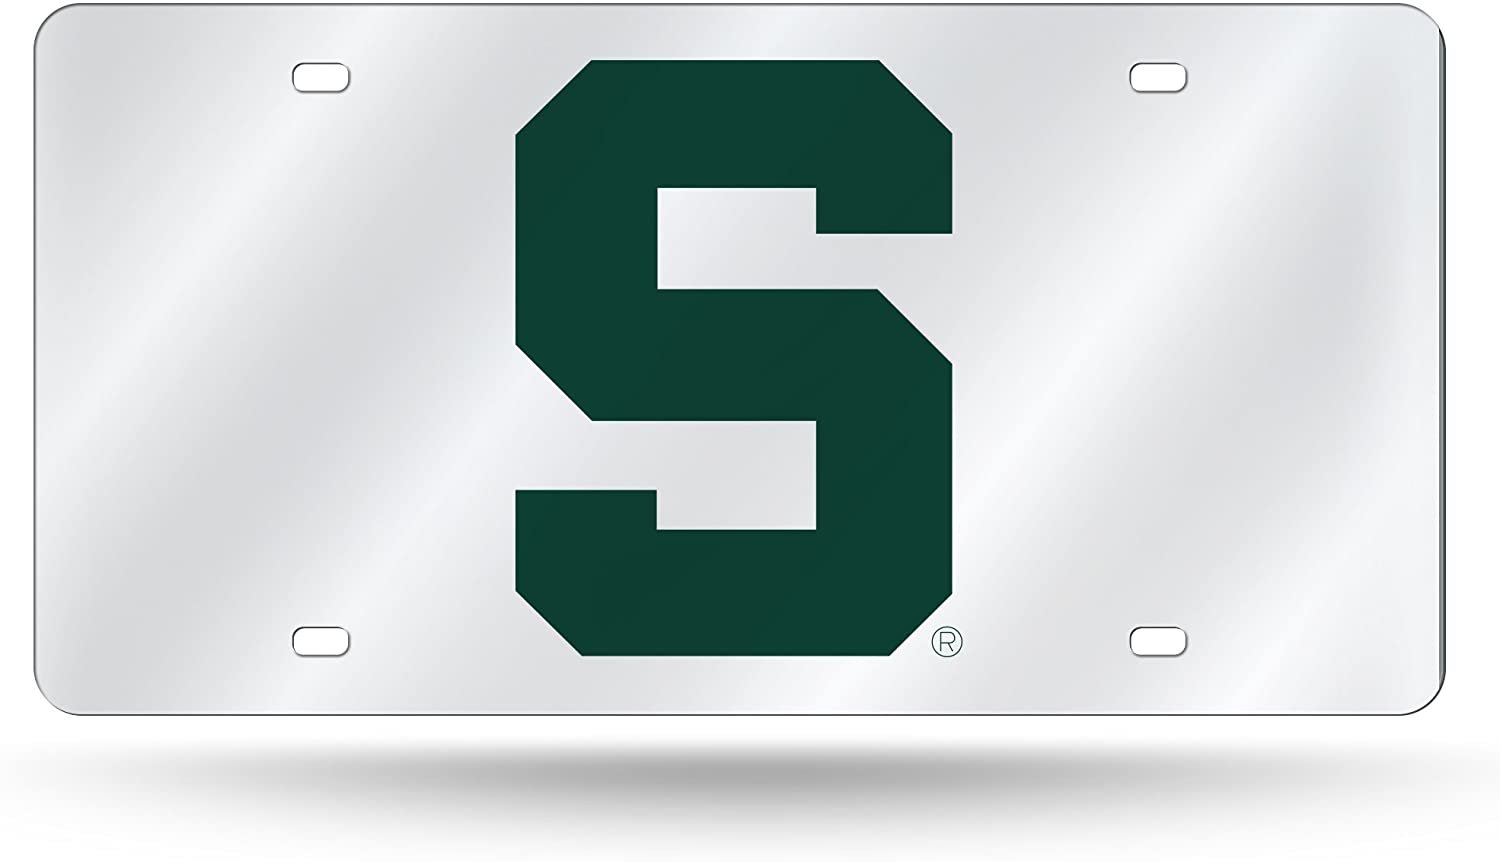 Michigan State University Spartans Premium Laser Cut Tag License Plate, Mirrored Acrylic Inlaid, 12x6 Inch